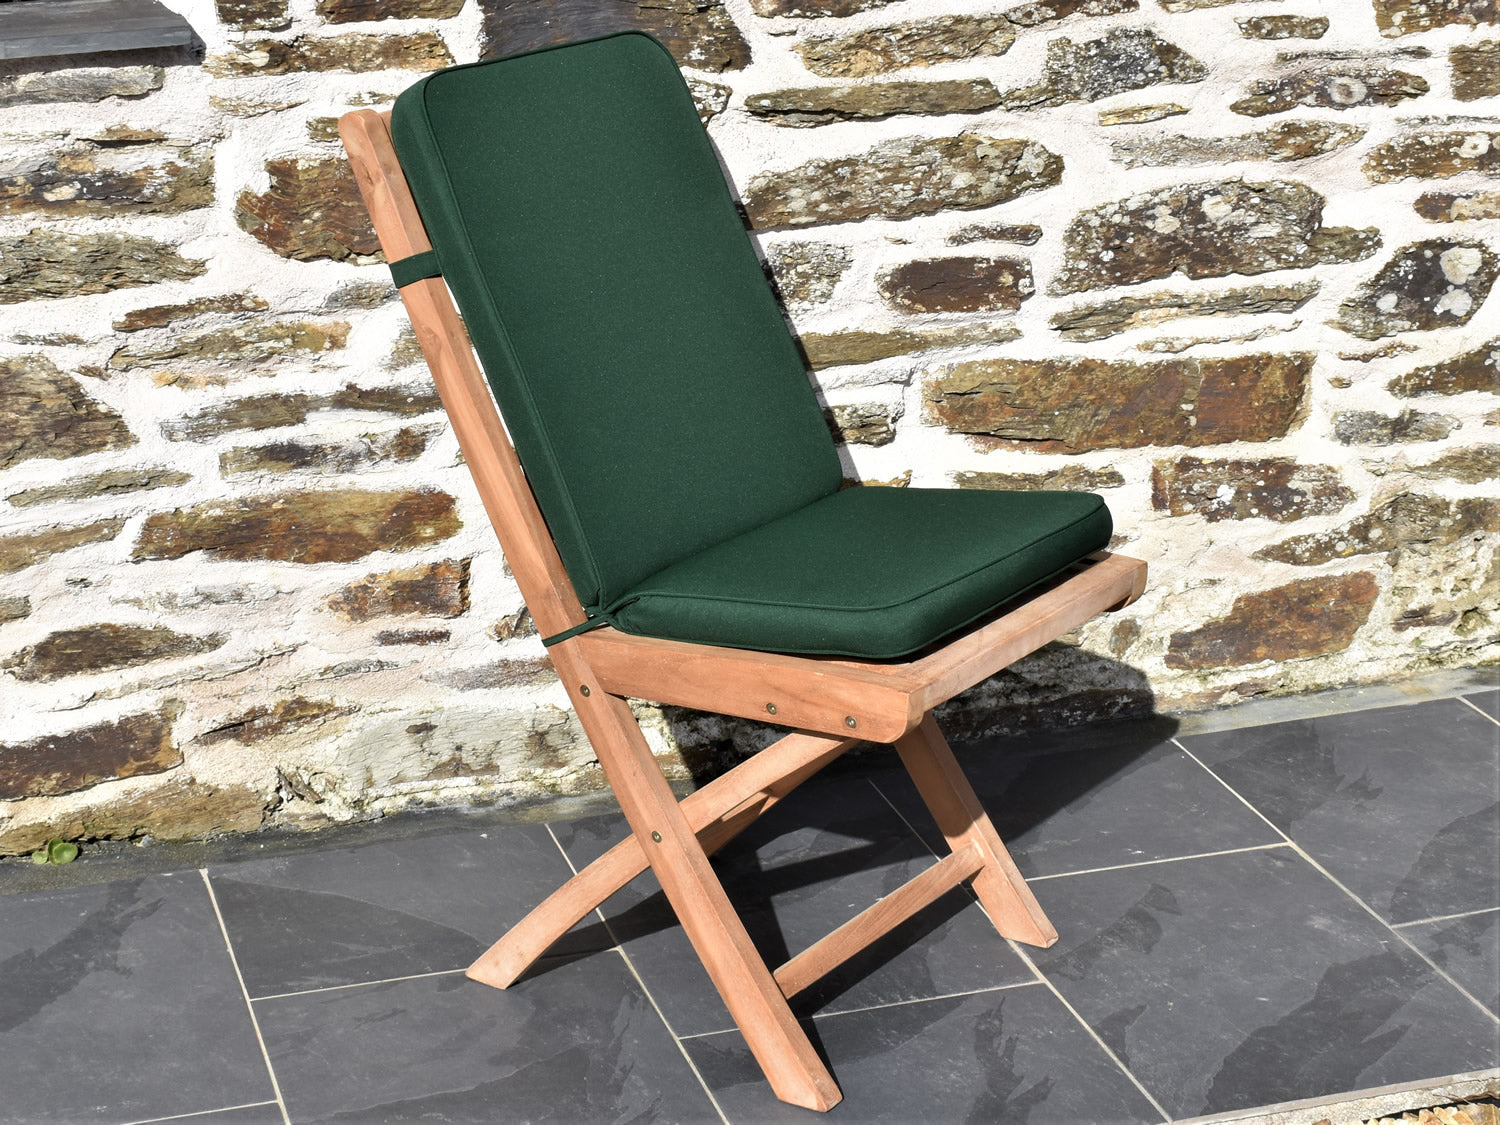 Classic dark forest green garden folding seat pad and back cushion, perfect for teak folding garden chairs